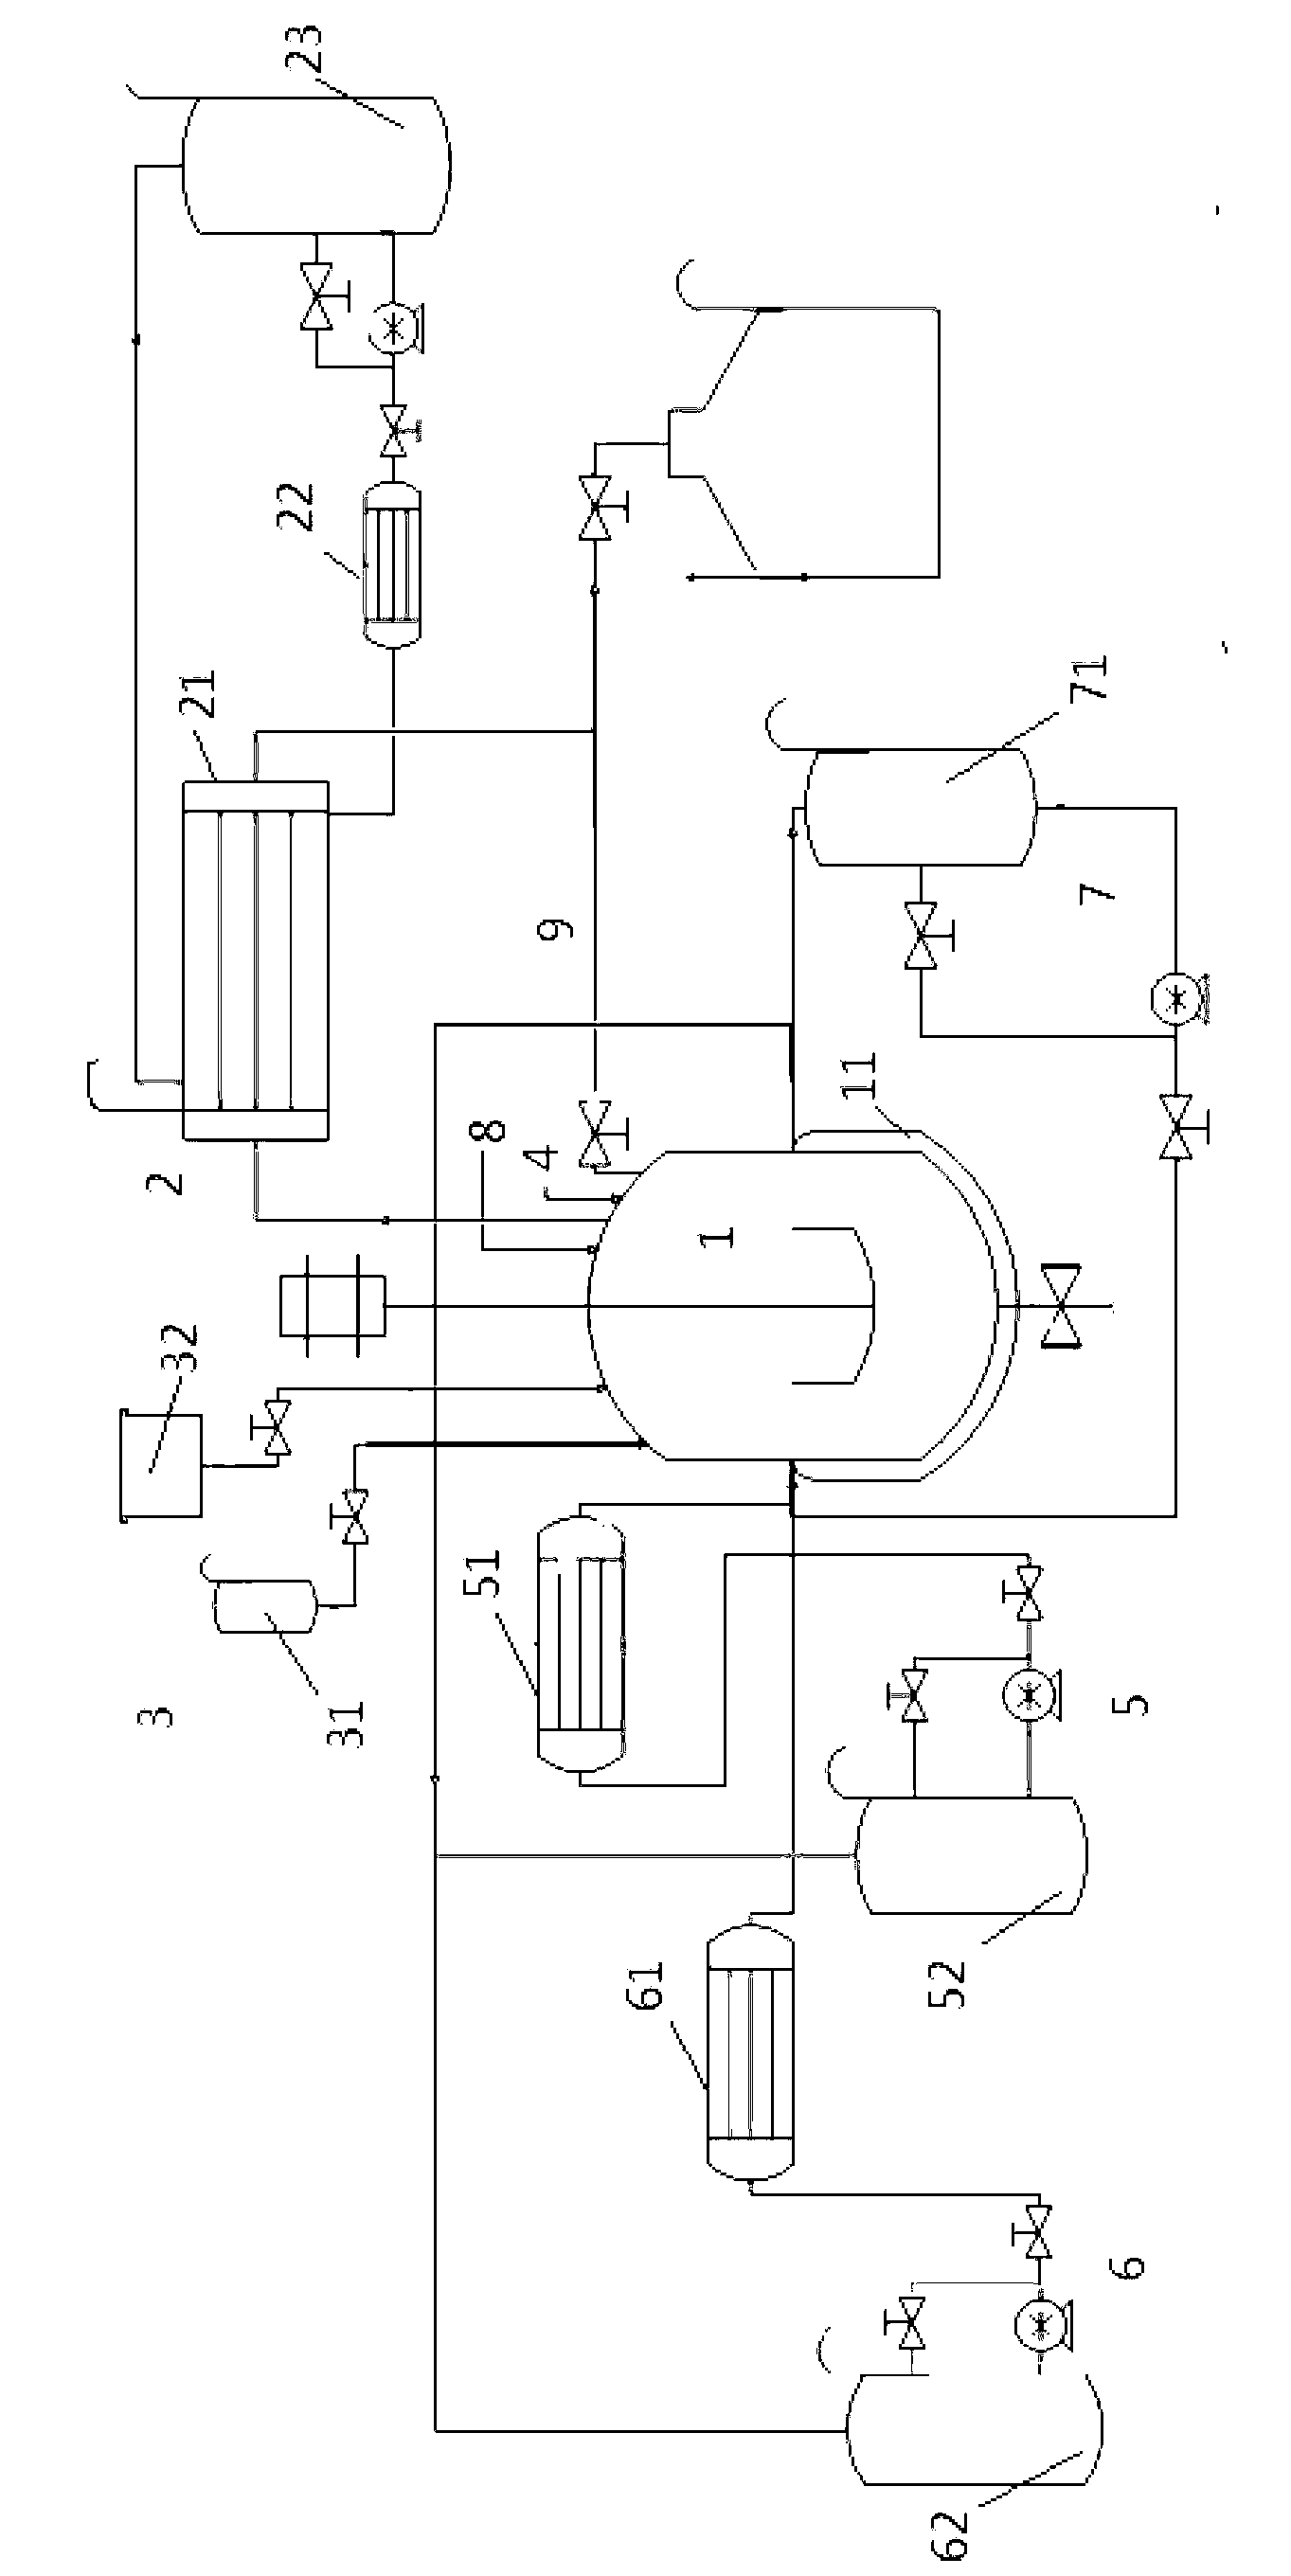 Industrial water-free oxygen-free production apparatus